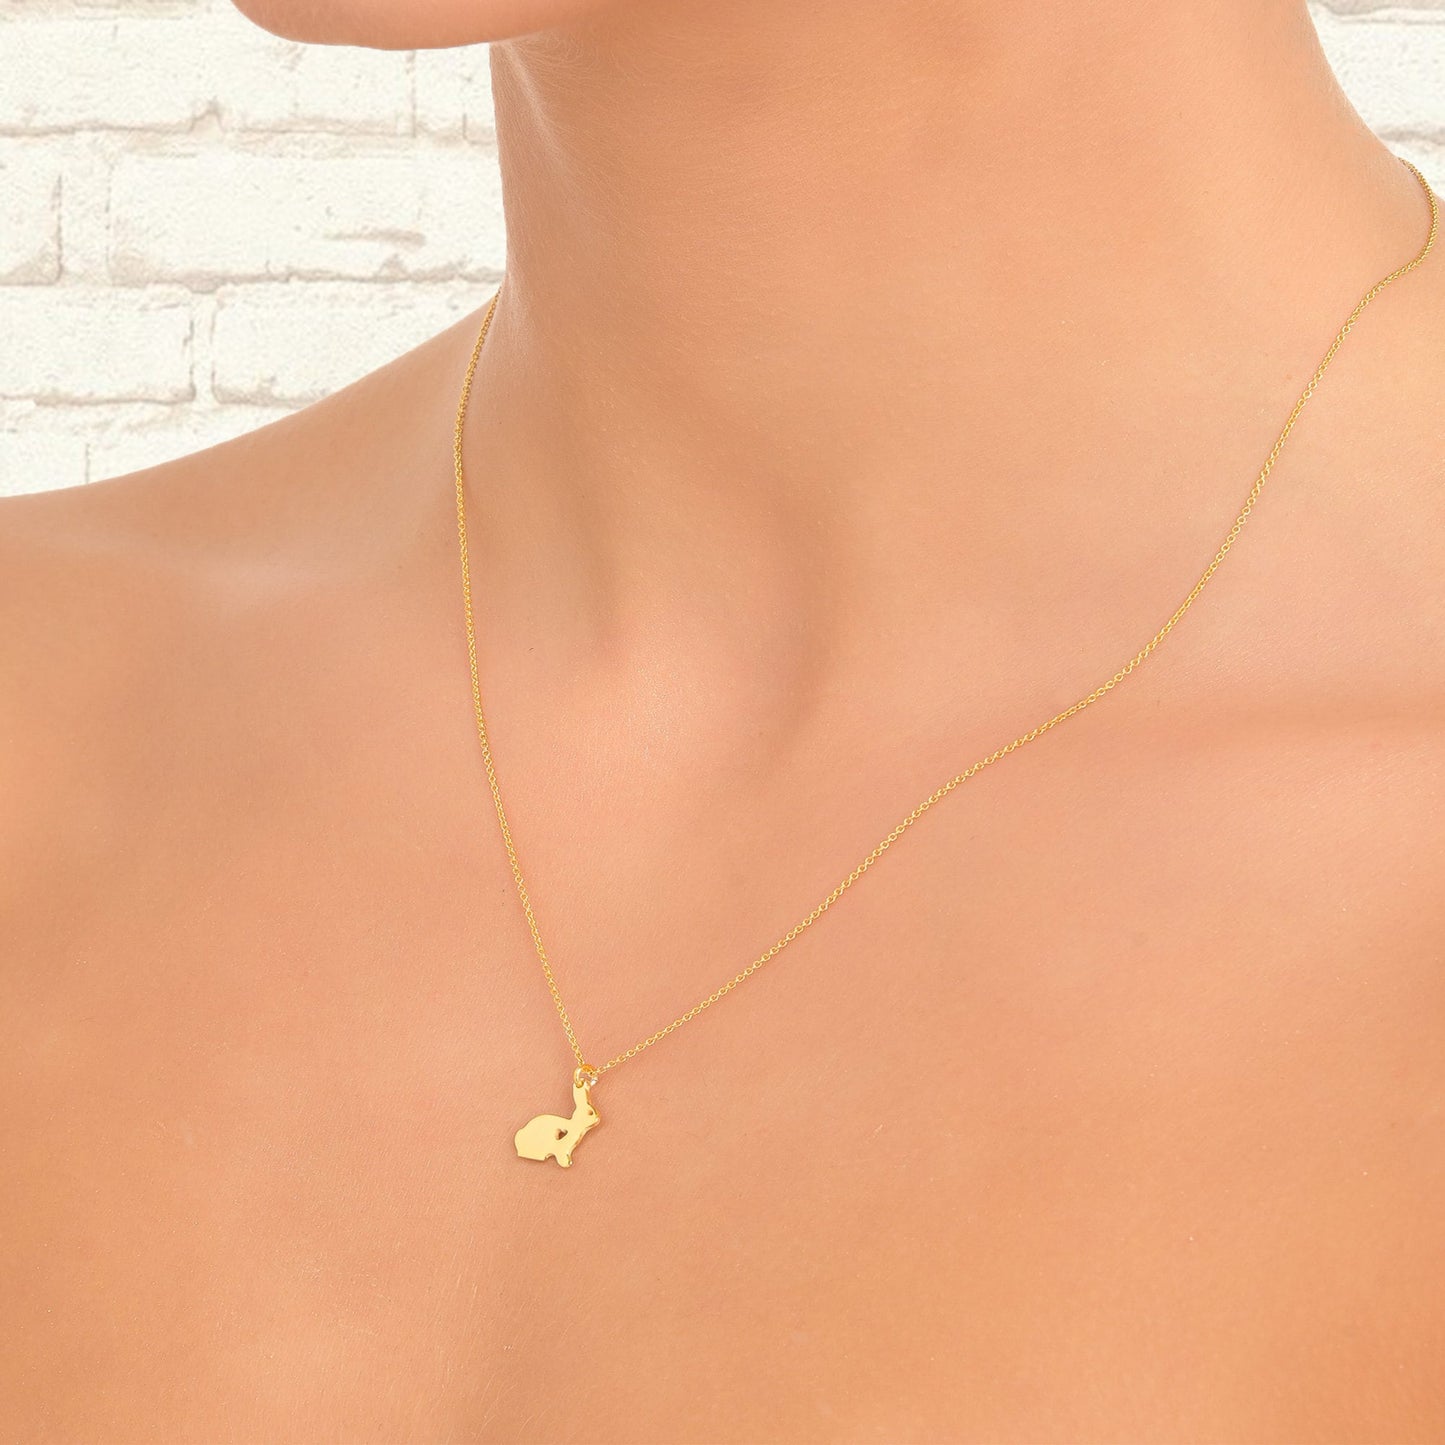 Cute Rabbit necklace, 14K Yellow Gold Rabbit pendant, Rabbit pendant, Rabbit jewelry, Animal lover, Rabbit necklace, unique gift for her